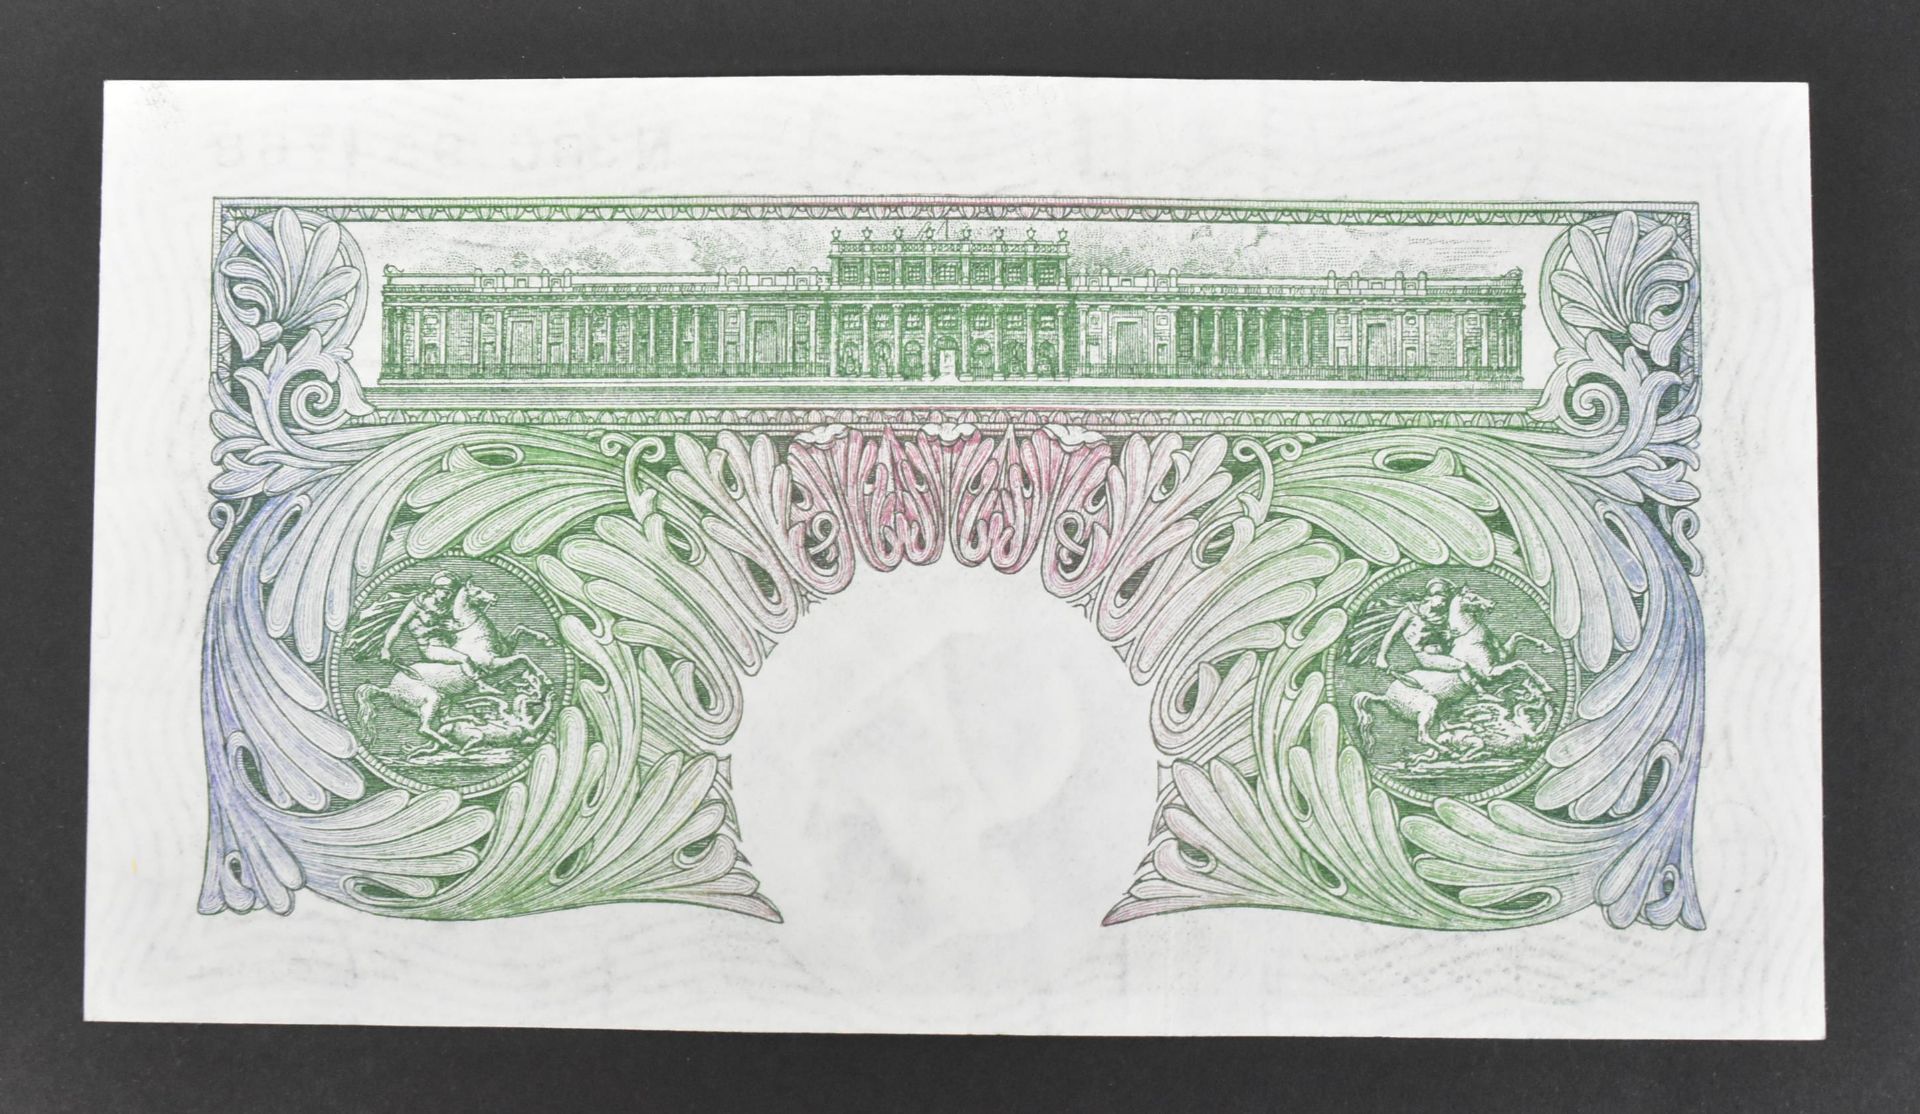 COLLECTION BRITISH UNCIRCULATED BANK NOTES - Image 55 of 61